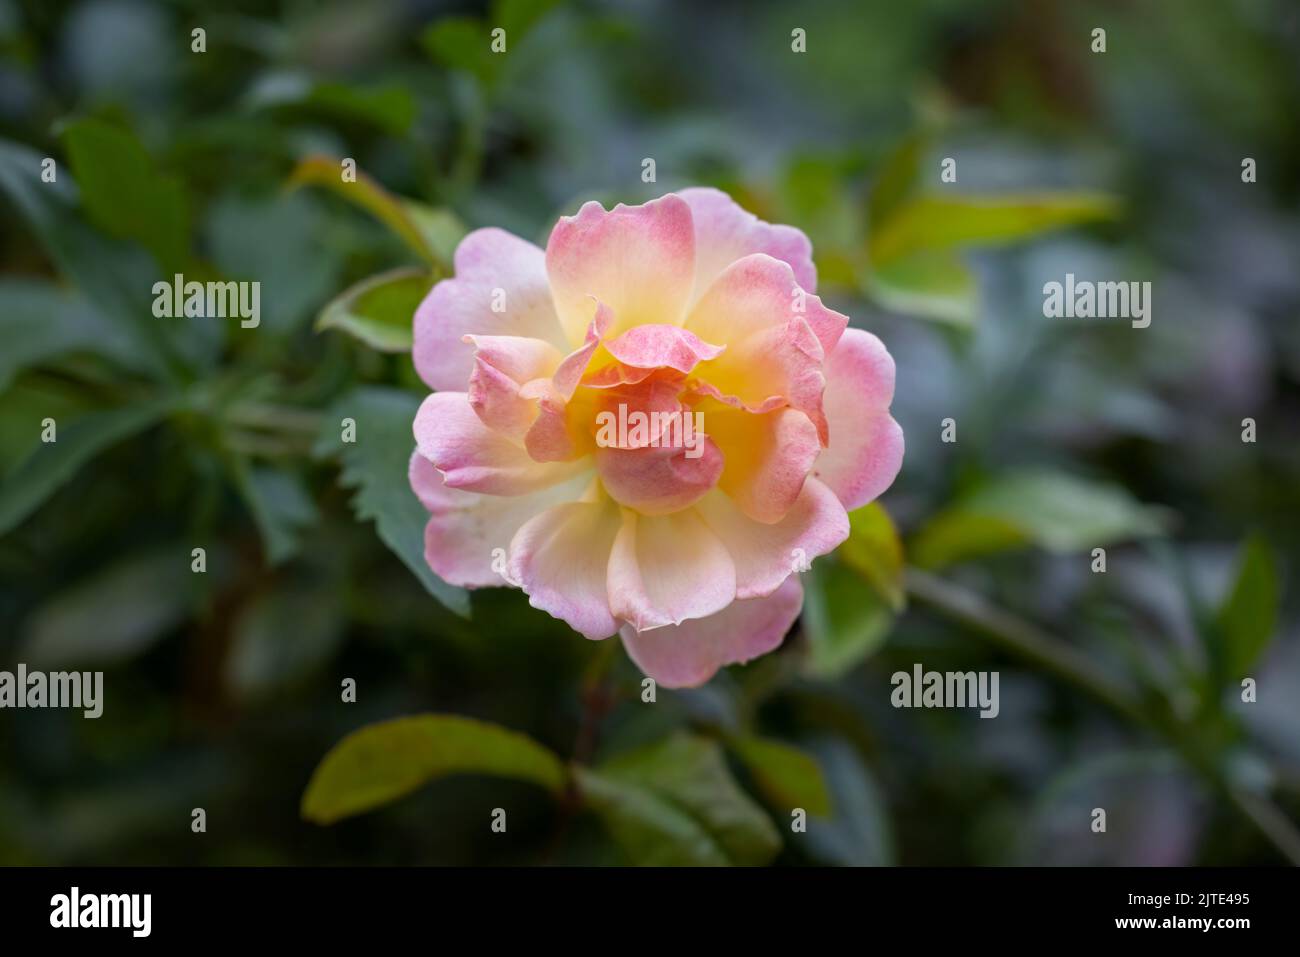 A close up of a solitary flower from a beautiful pink rambling rose Stock Photo